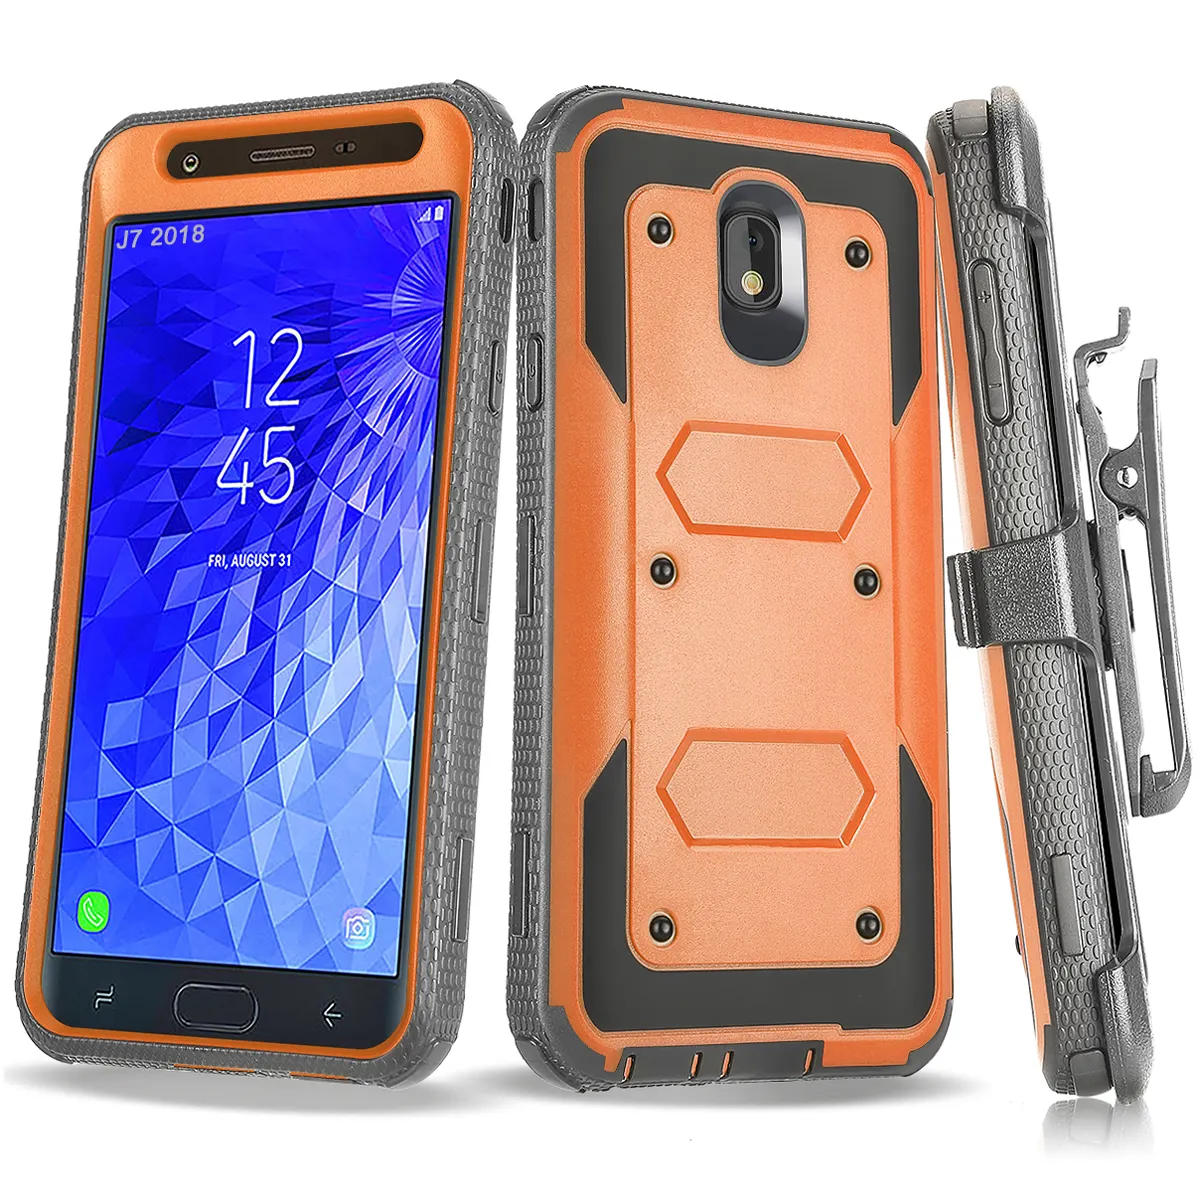 Robot Cover For Samsung Galaxy J3 J5 J7prime Note 20 3 in1 Tri Layer Full Protection Belt Clip Mobile Case Covers